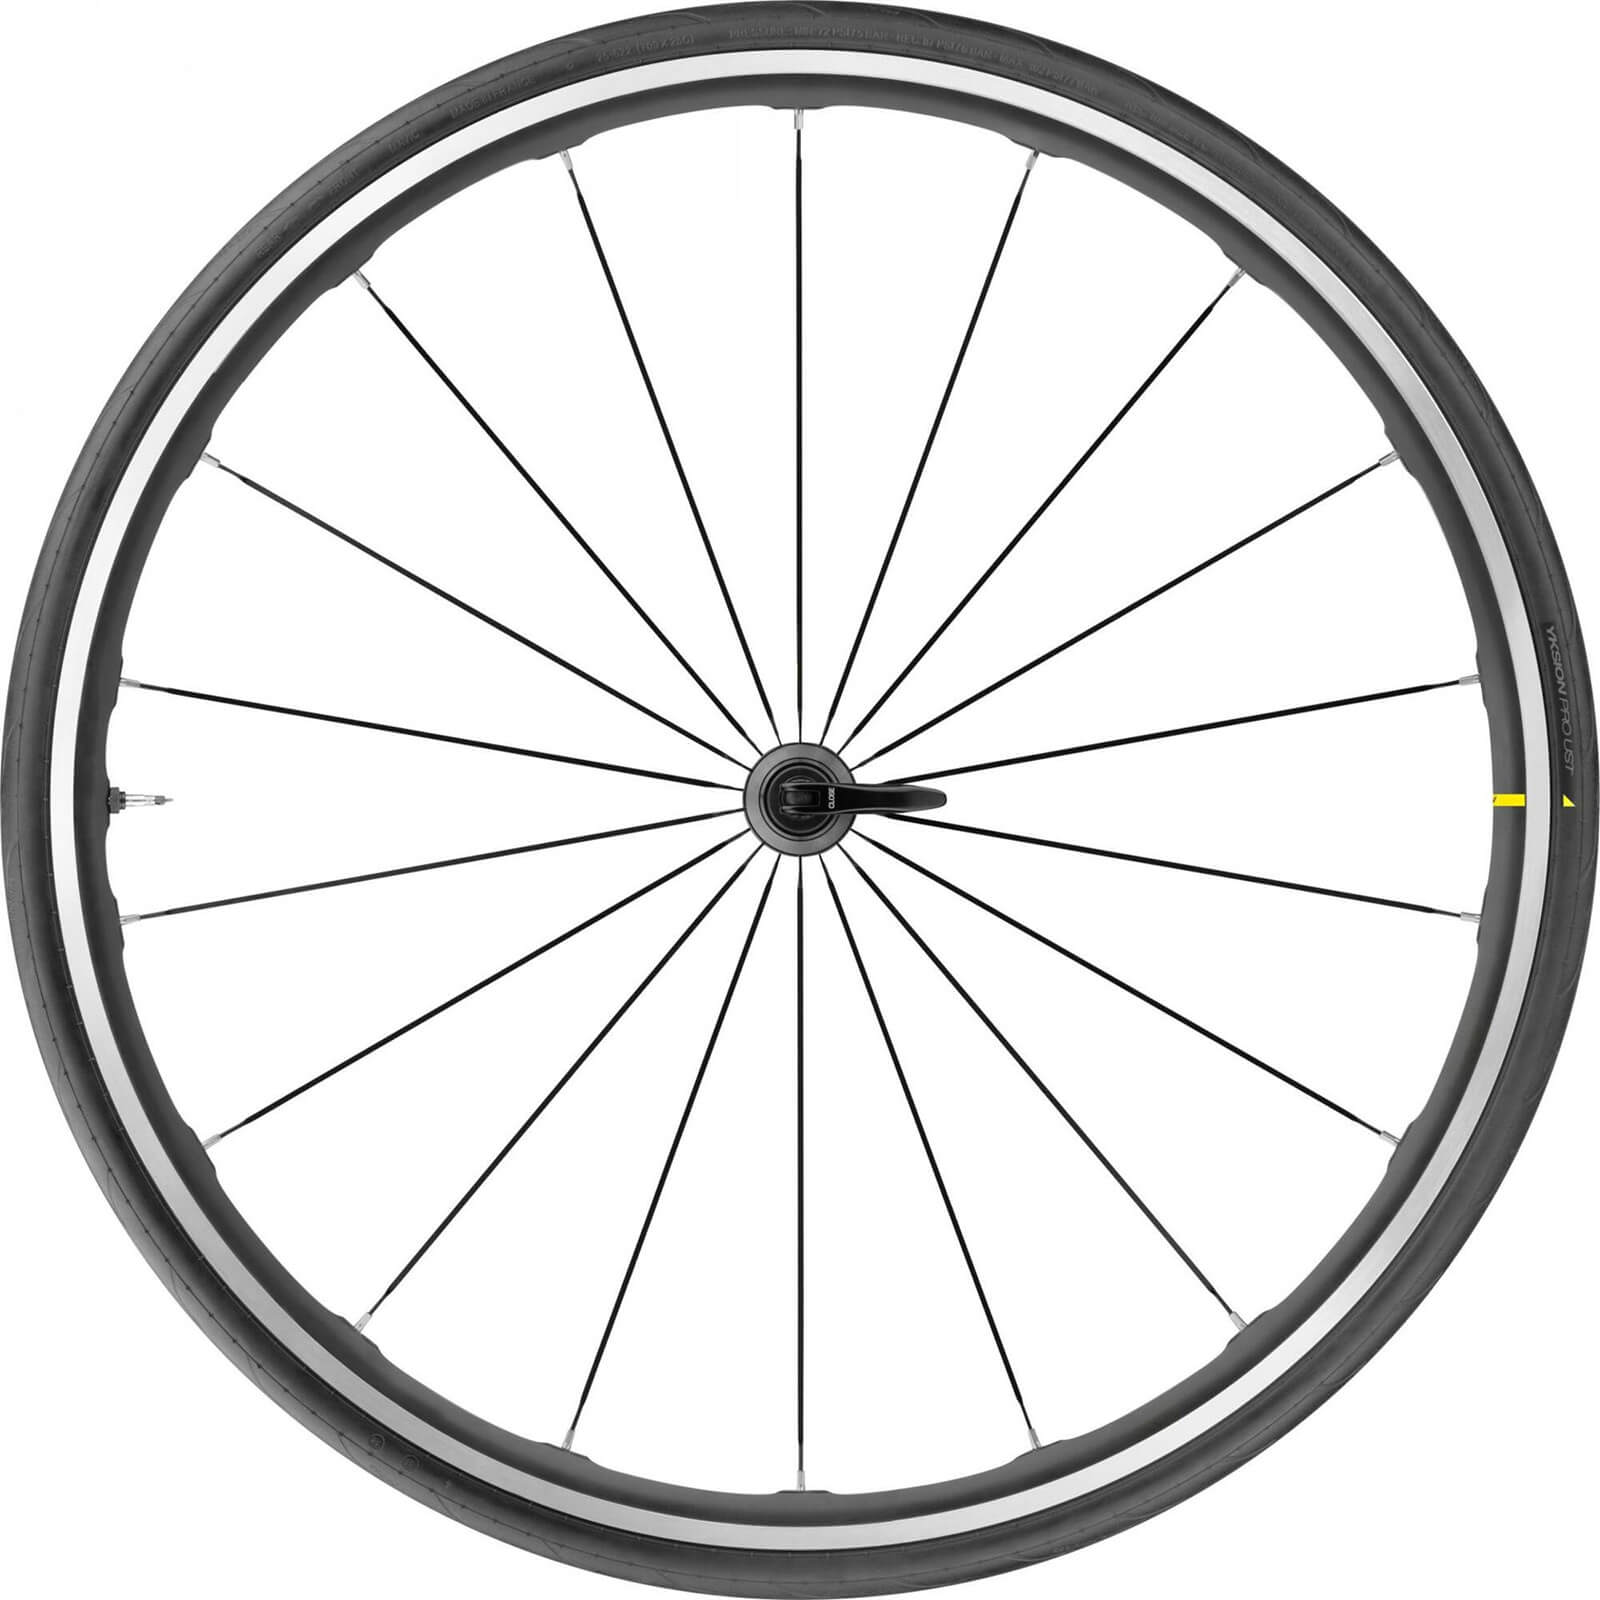 Mavic Ksyrium UST Tubeless Carbon Clincher Front Wheel with Yksion Tyre